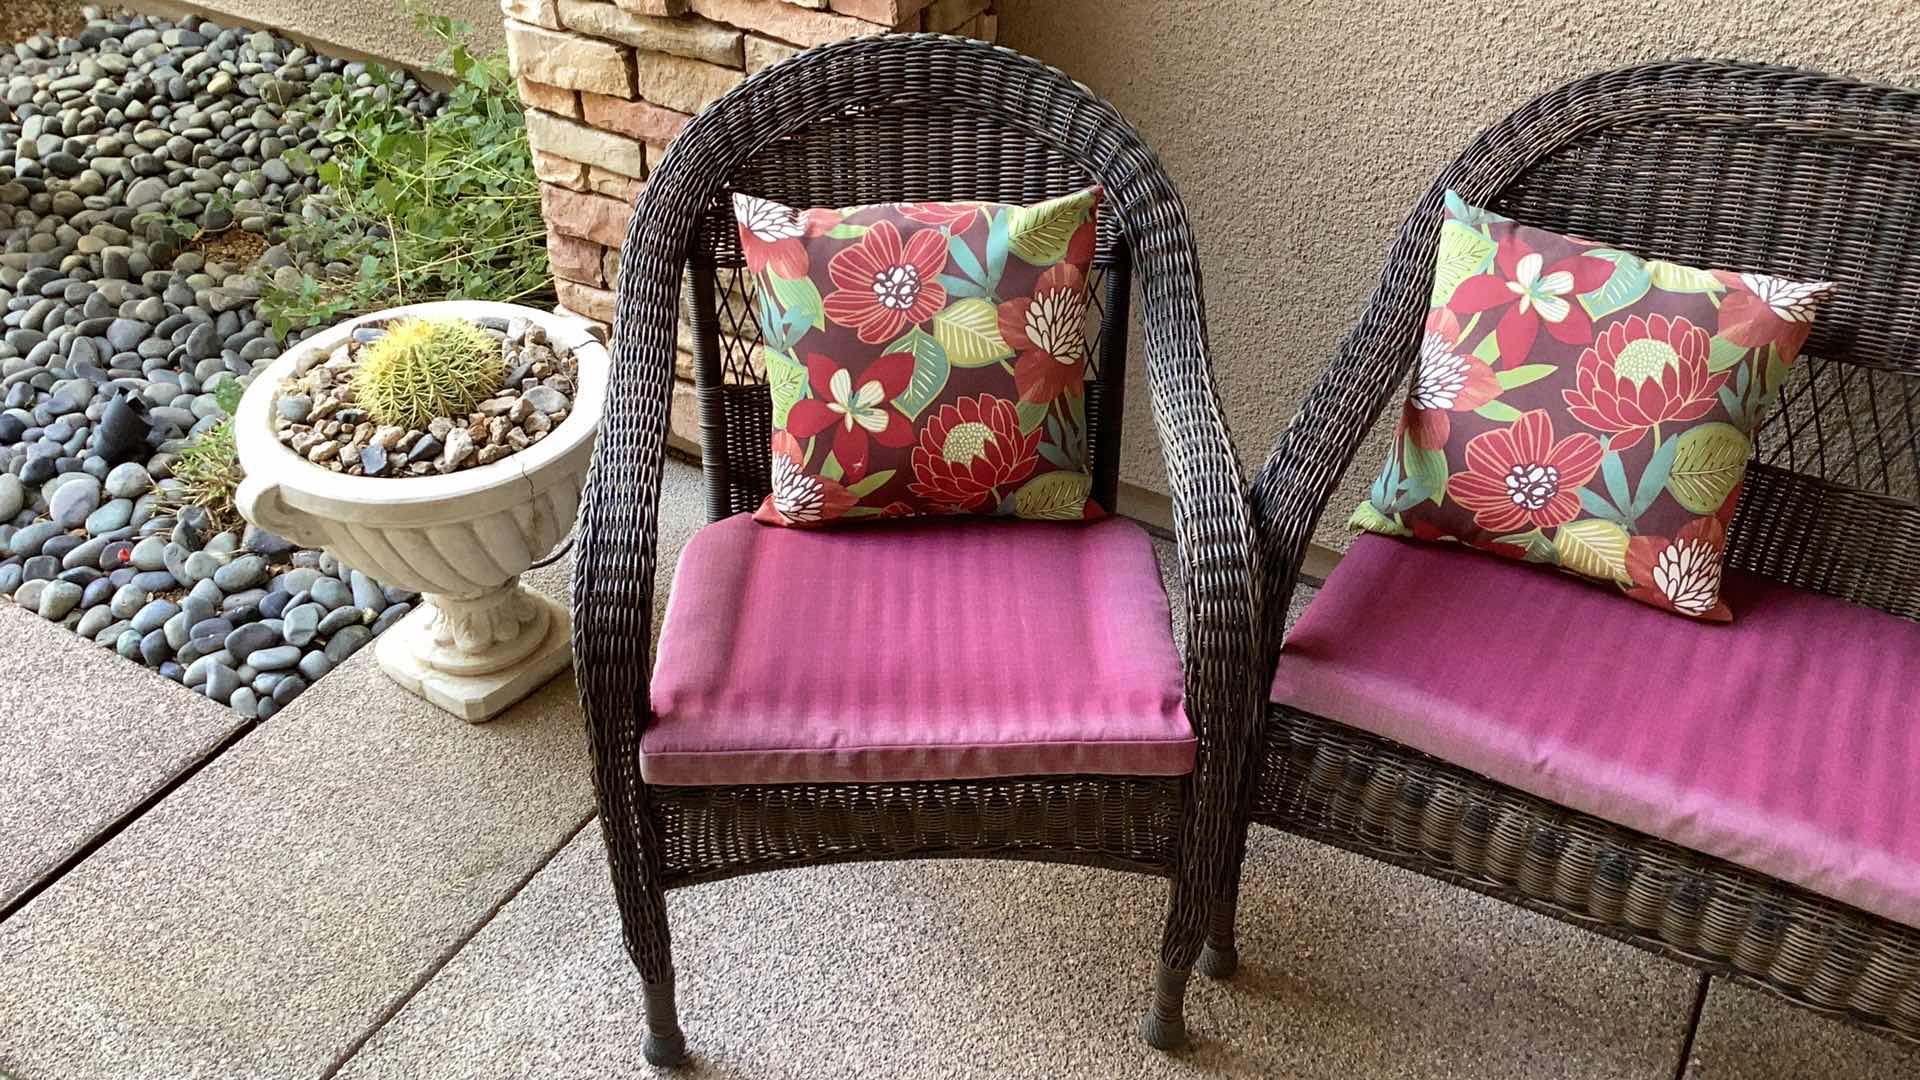 Photo 3 of TWO PIECE WICKER OUTDOOR PATIO FURNITURE WITH CUSHIONS